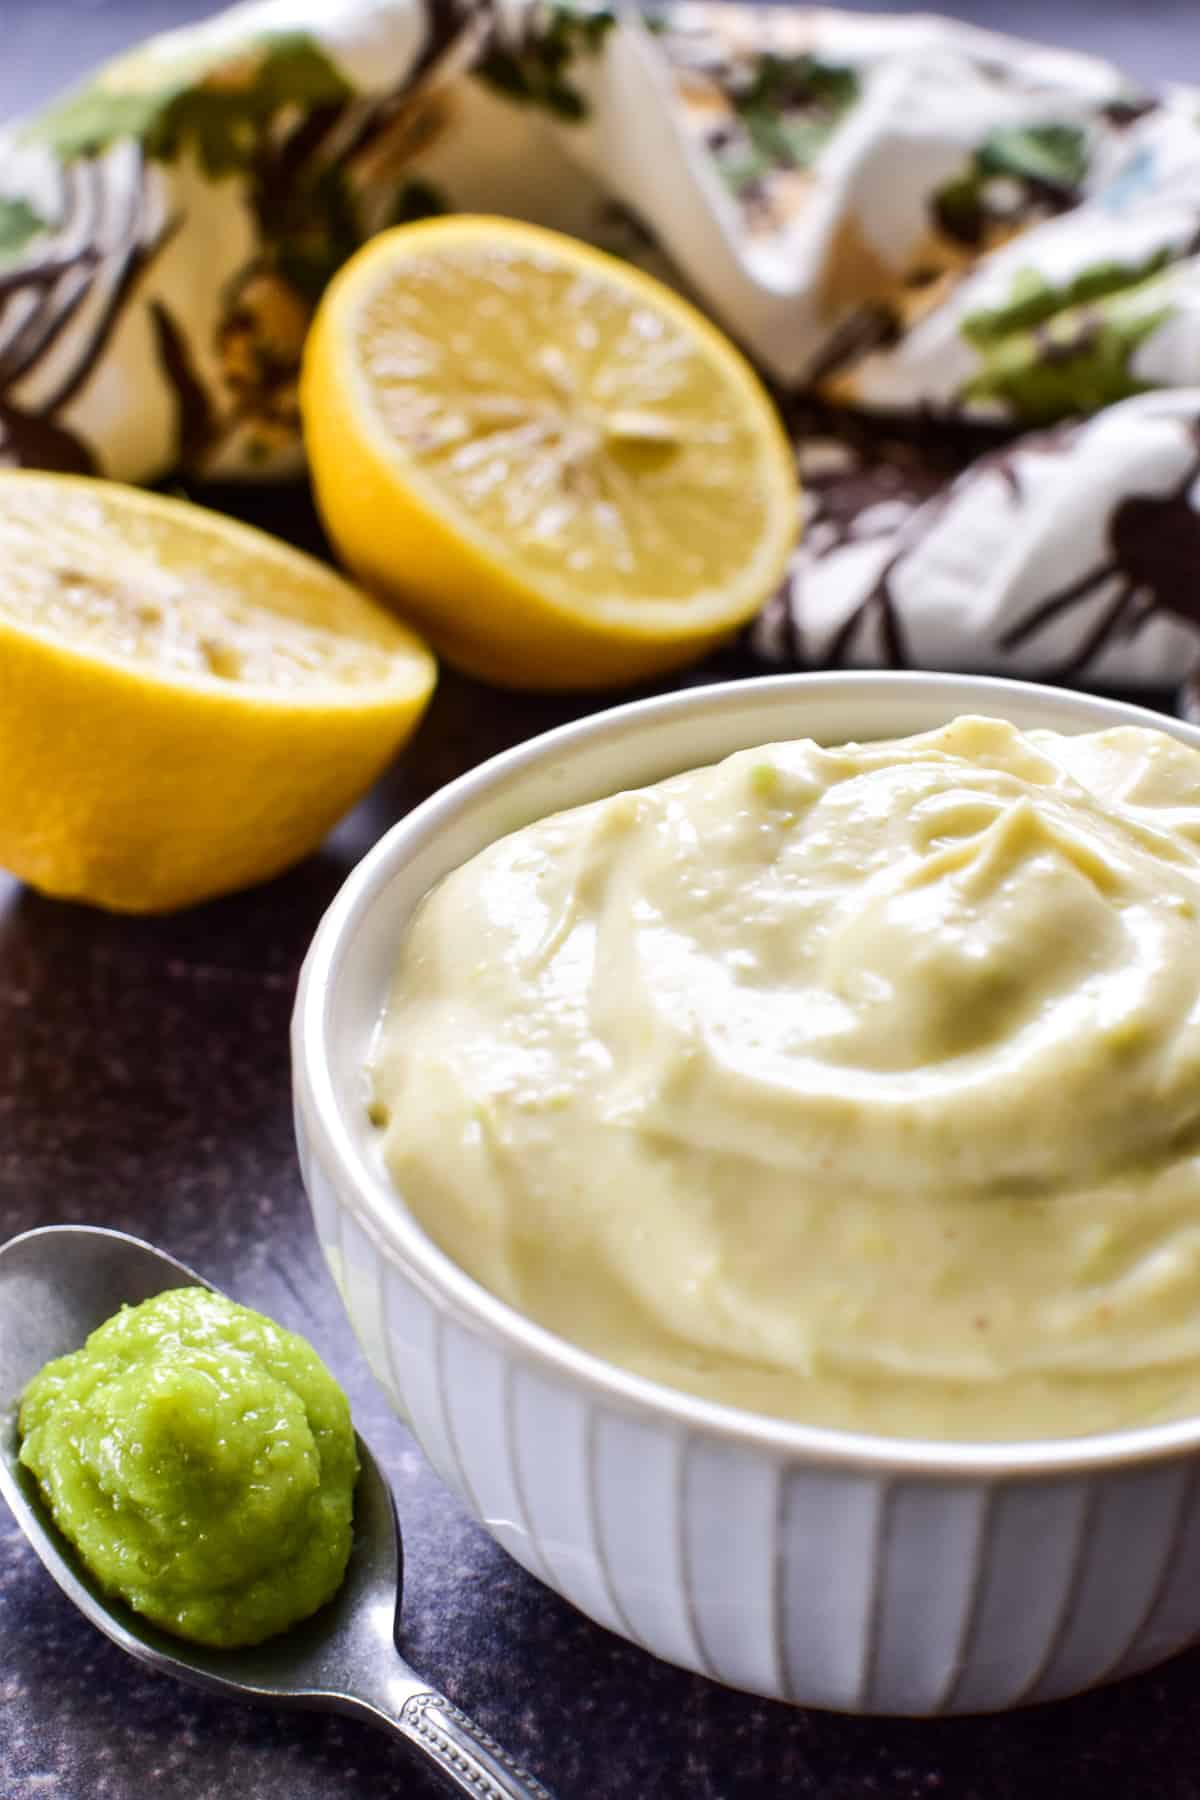 Side view of Wasabi Mayo in a small white bowl with a spoonful of wasabi paste and a cut lemon